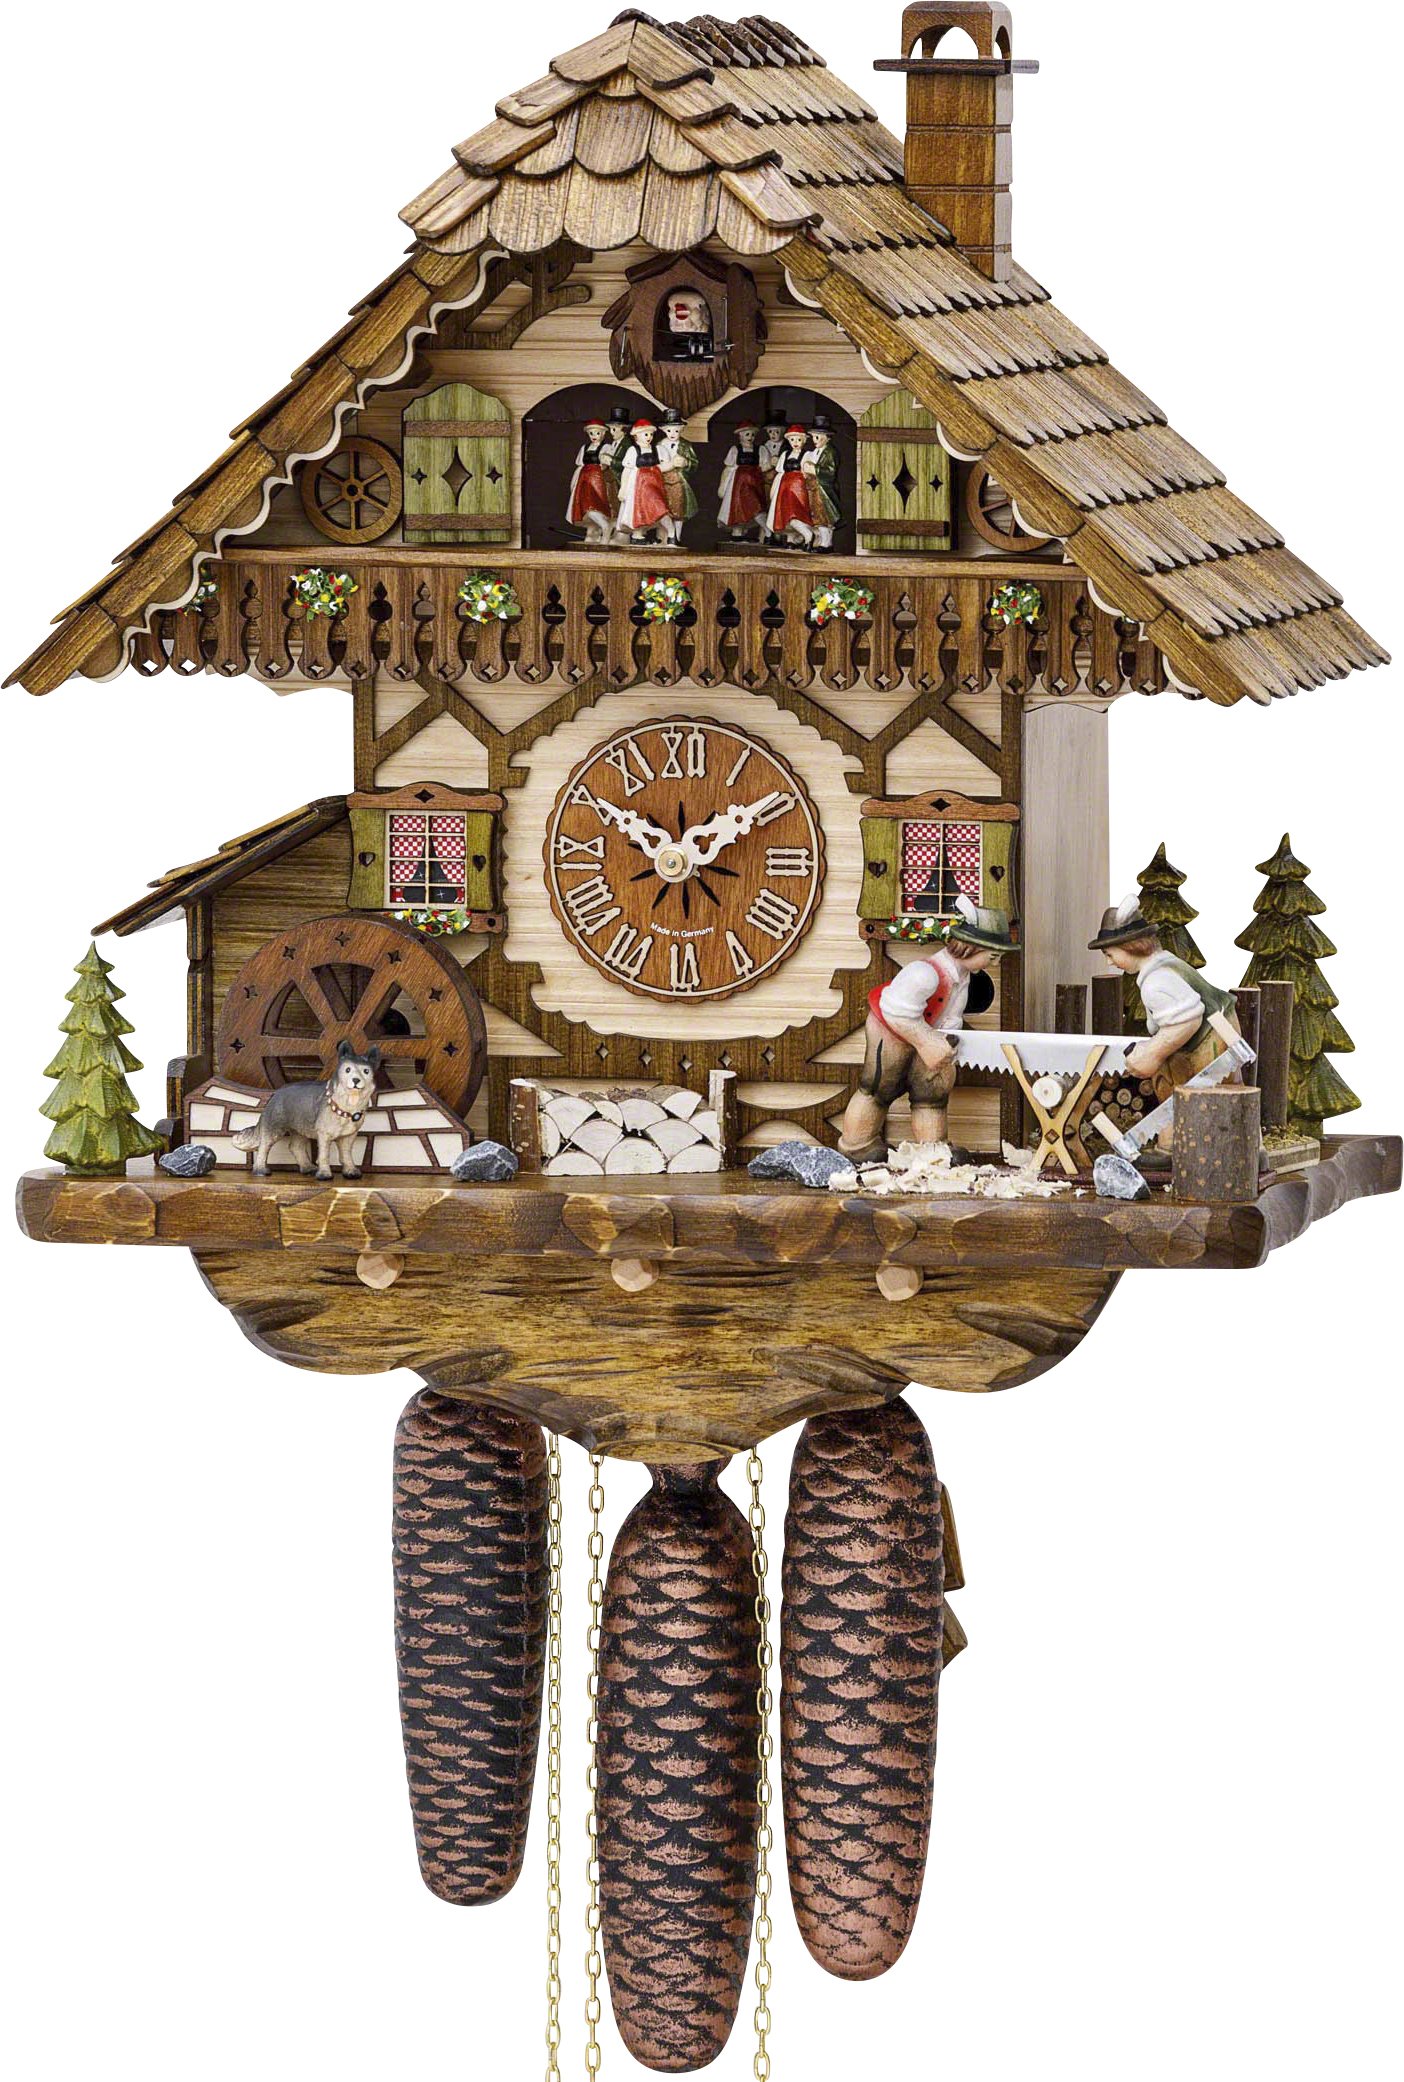 Cuckoo Clock 8-day-movement Chalet-Style 38cm by Hekas